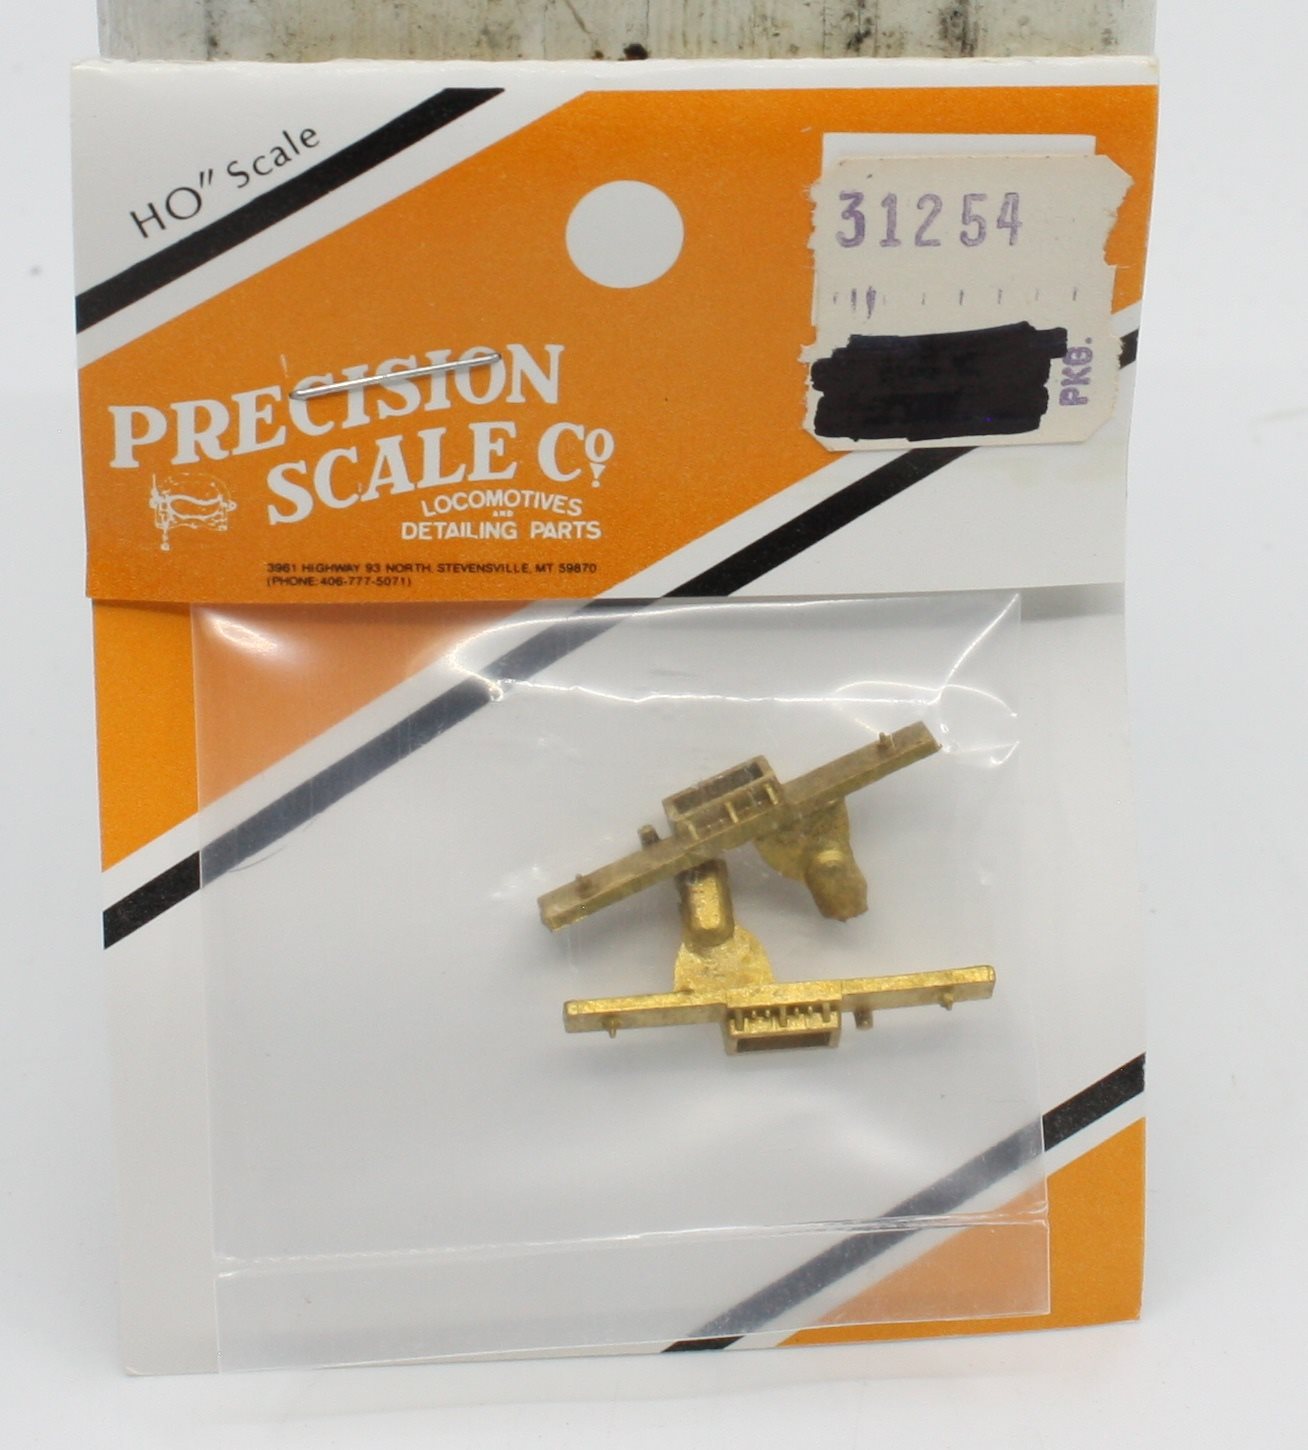 Precision Scale Company 31254 HO Scale Detailing Parts